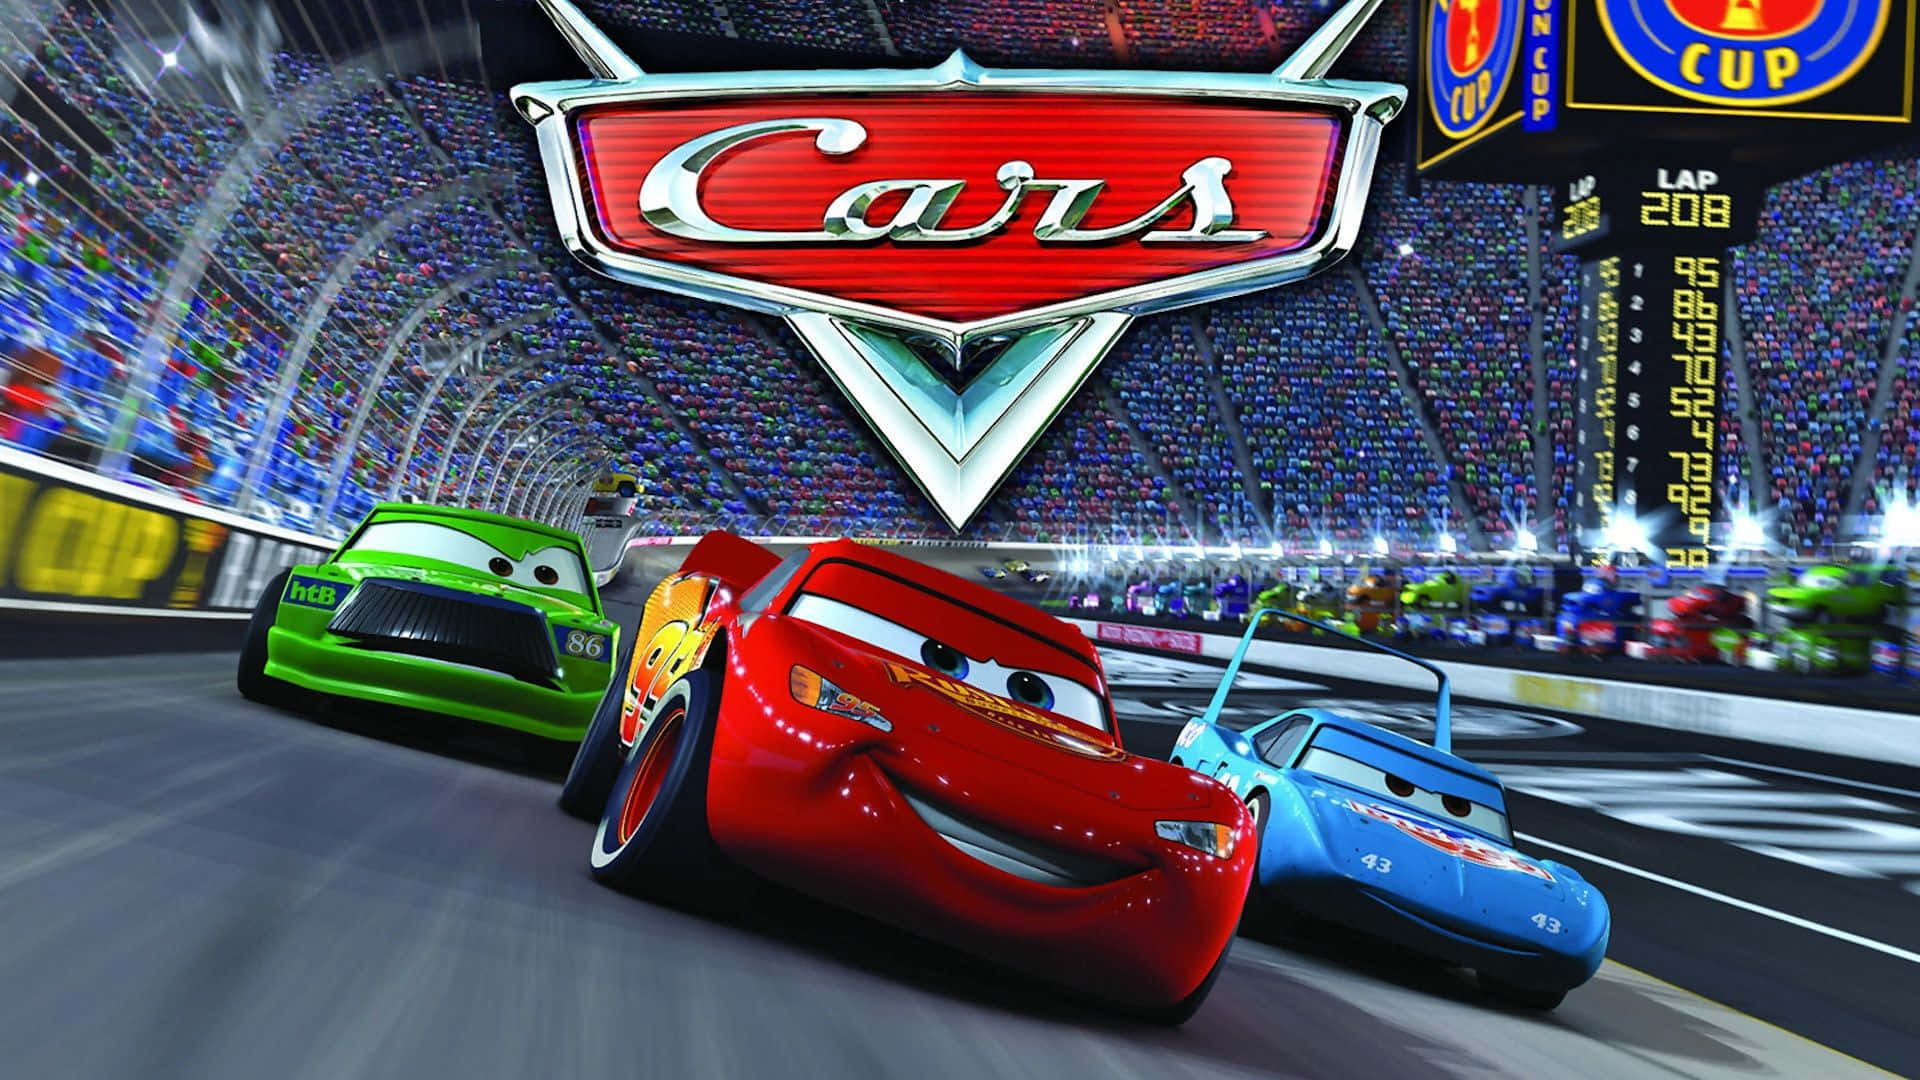 Lightning McQueen Racing on a Track